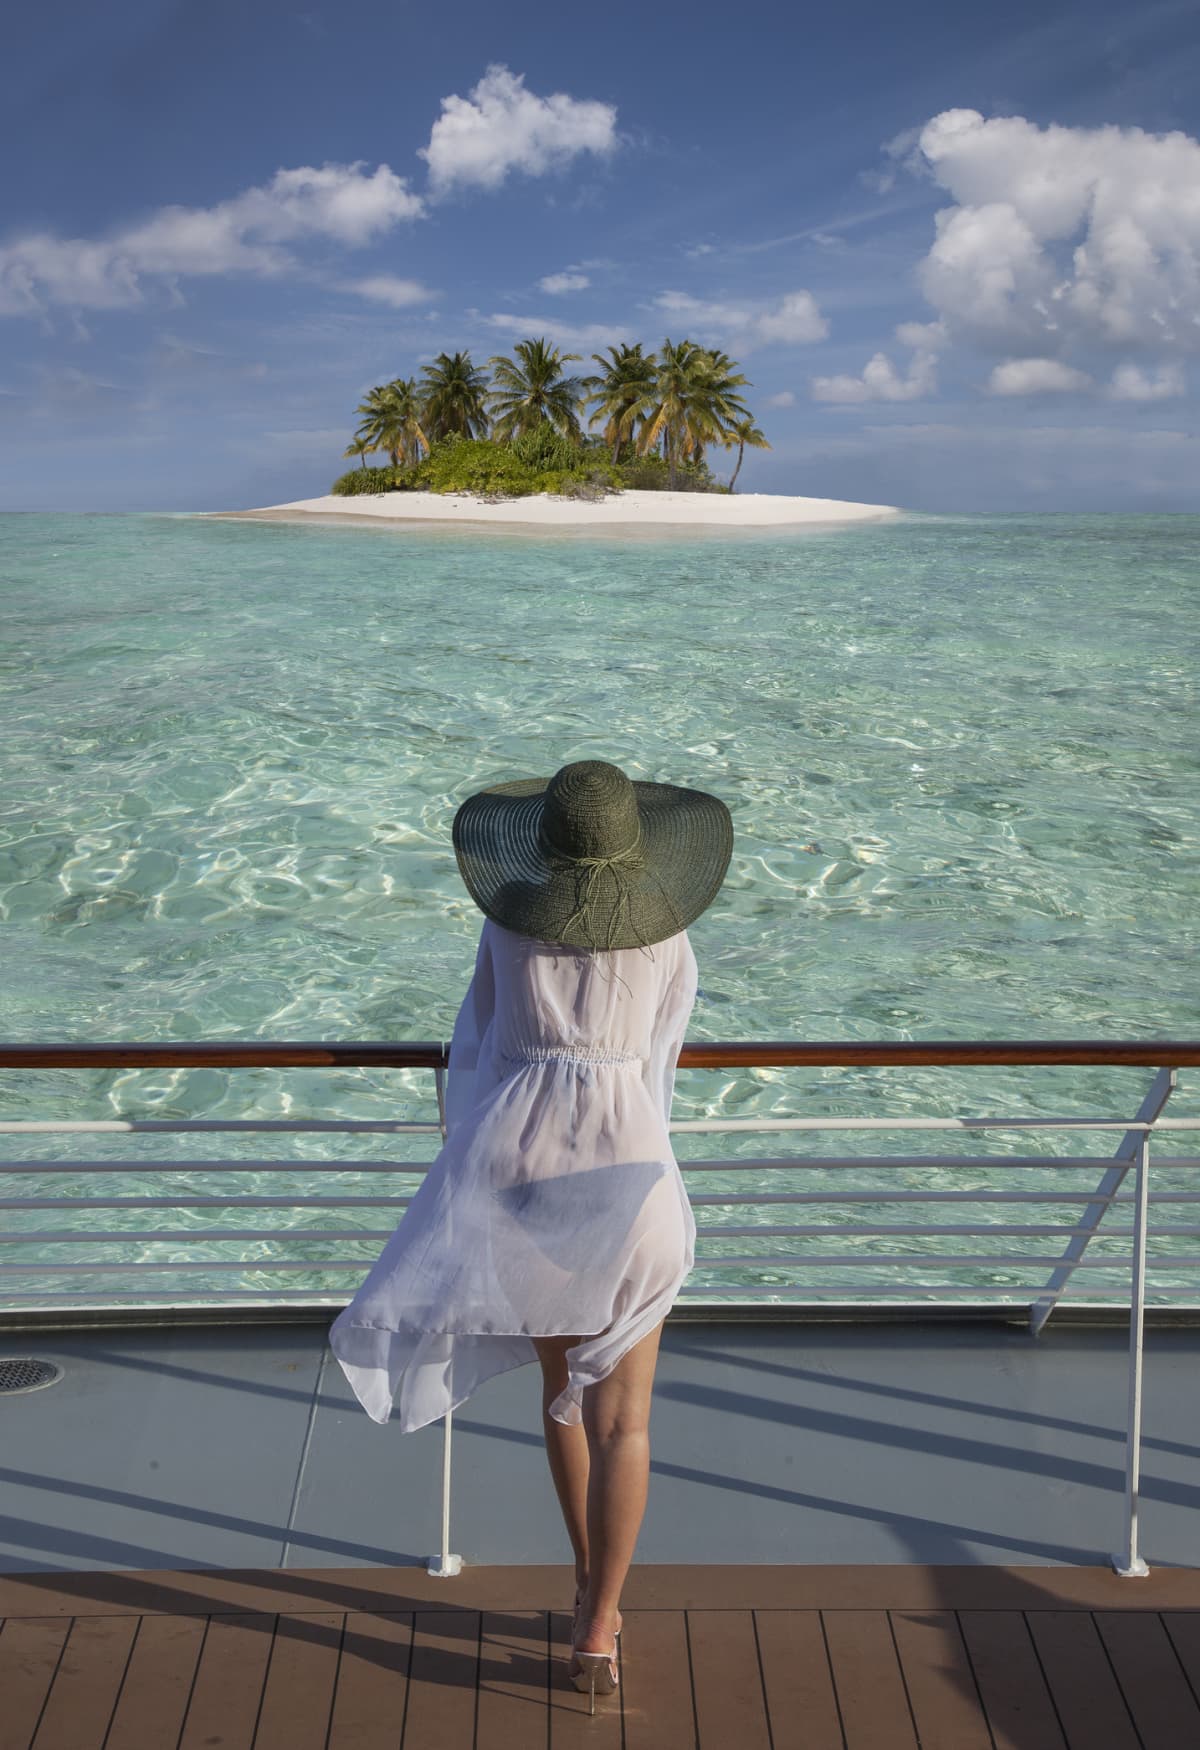 A woman stands on the deck of a cruise ship looking at a deserted island in the distance